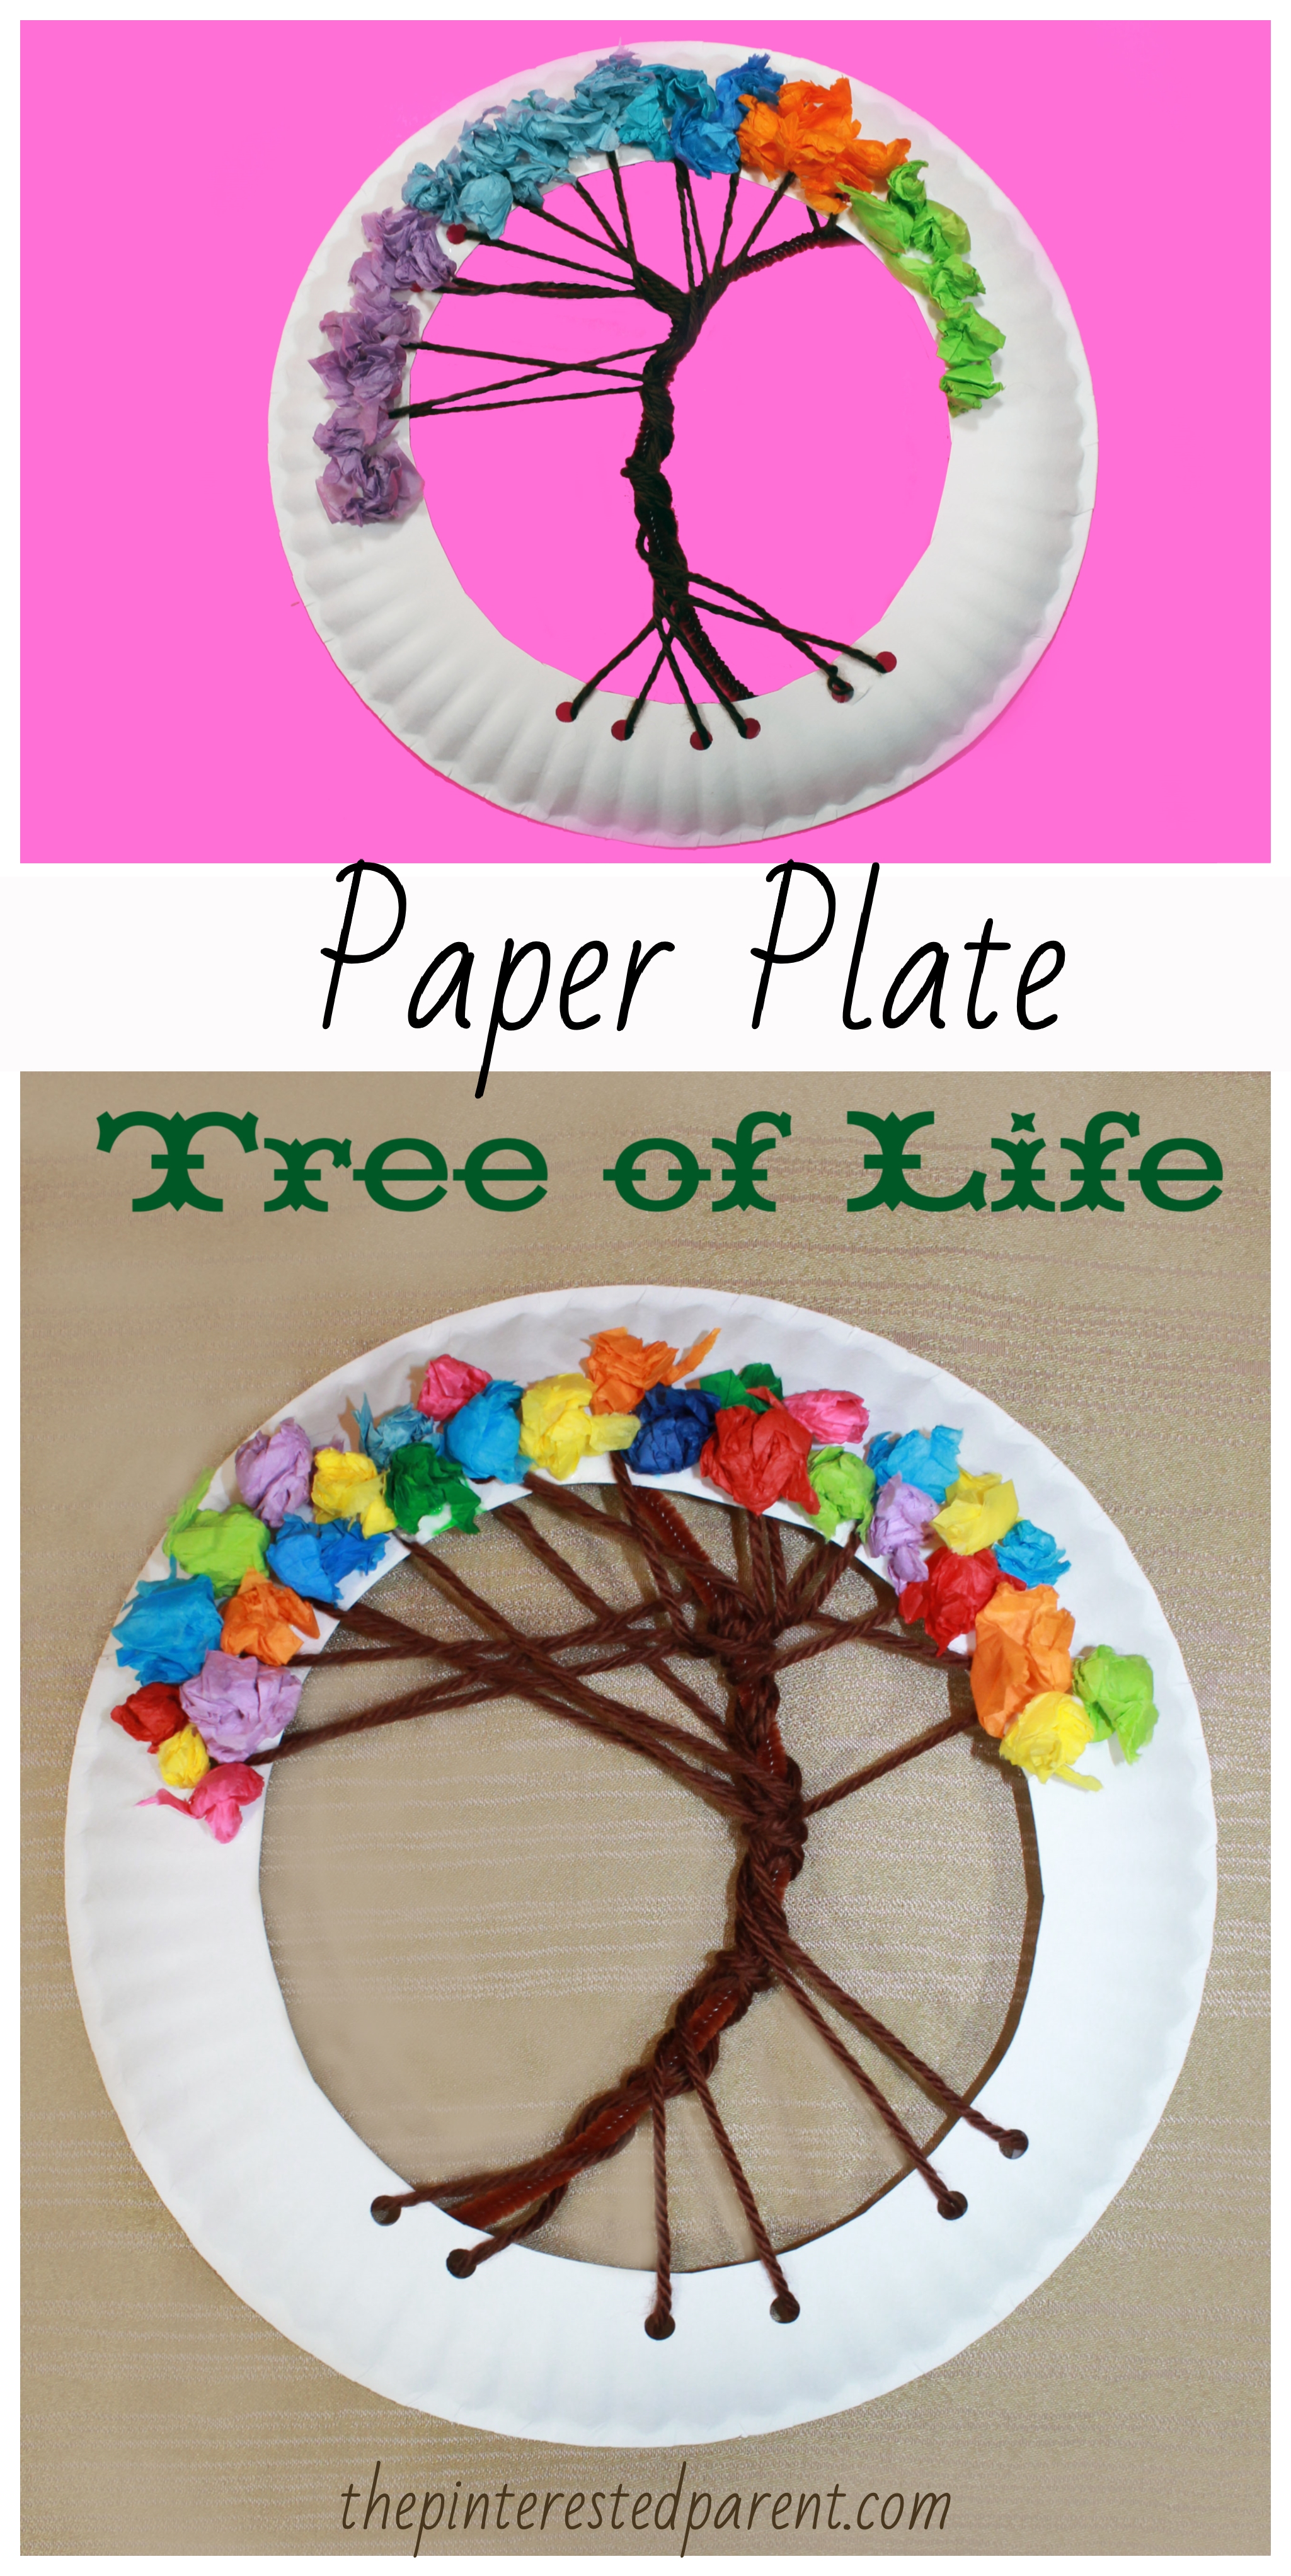 Paper Plate Tree of Life Lacing Craft. Arts and crafts for kids. Yarn and tissue paper